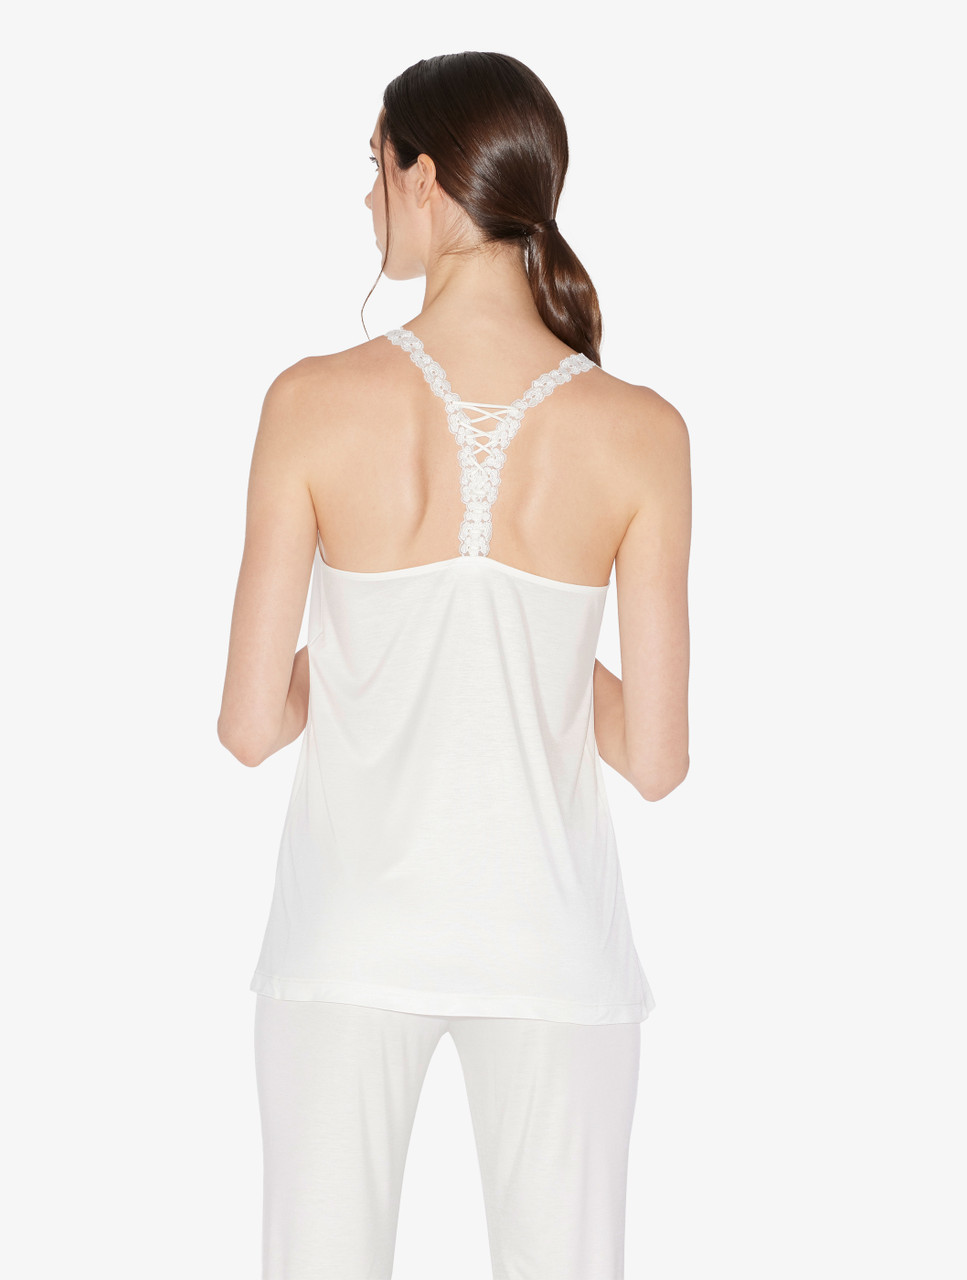 Camisole in off-white modal with embroidered tulle